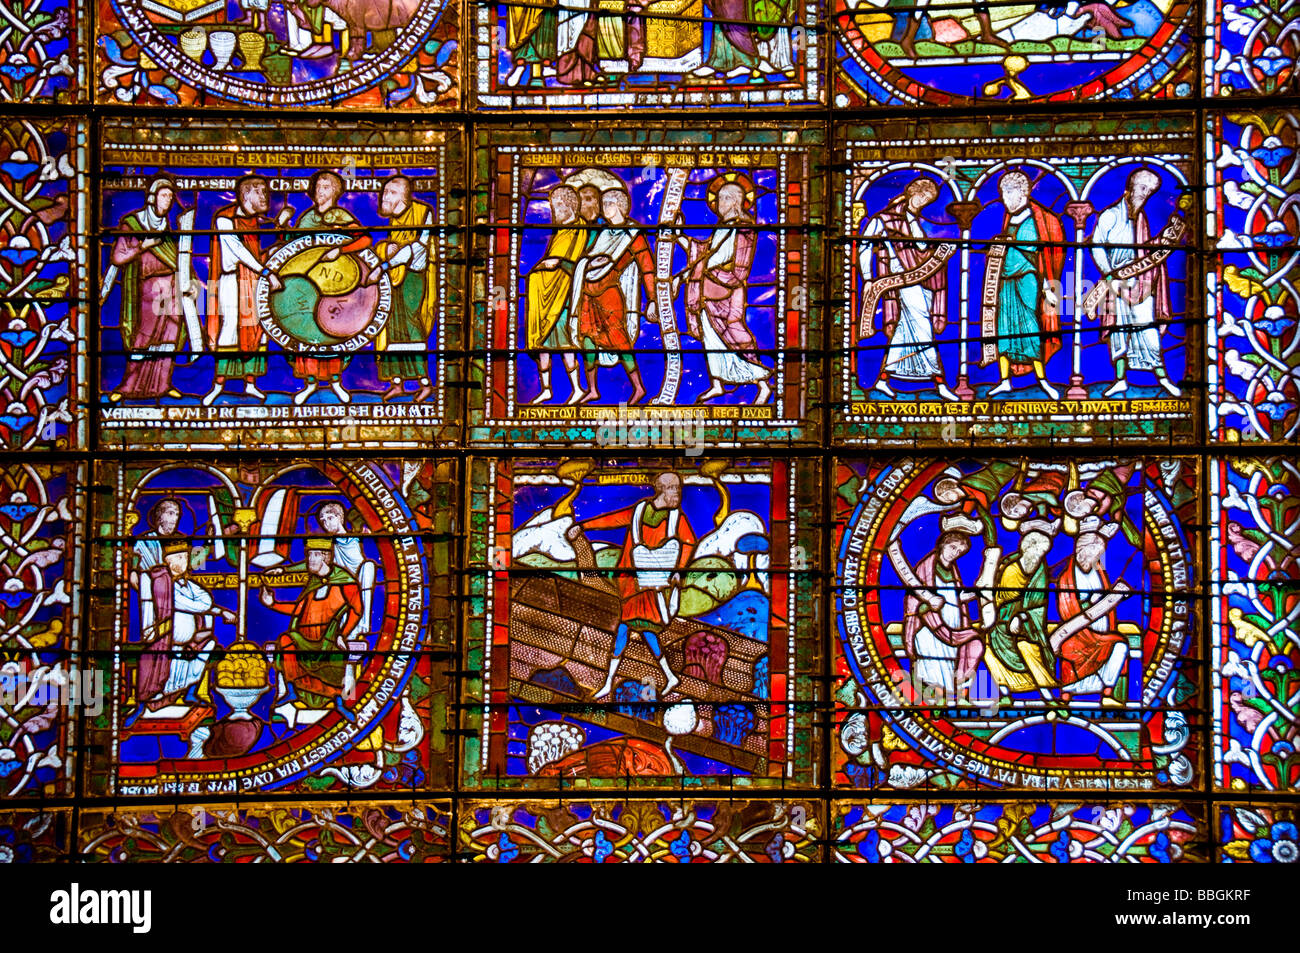 12th C Stained Glas Window, Canterbury Cathedral, Kent, UK Stock Photo